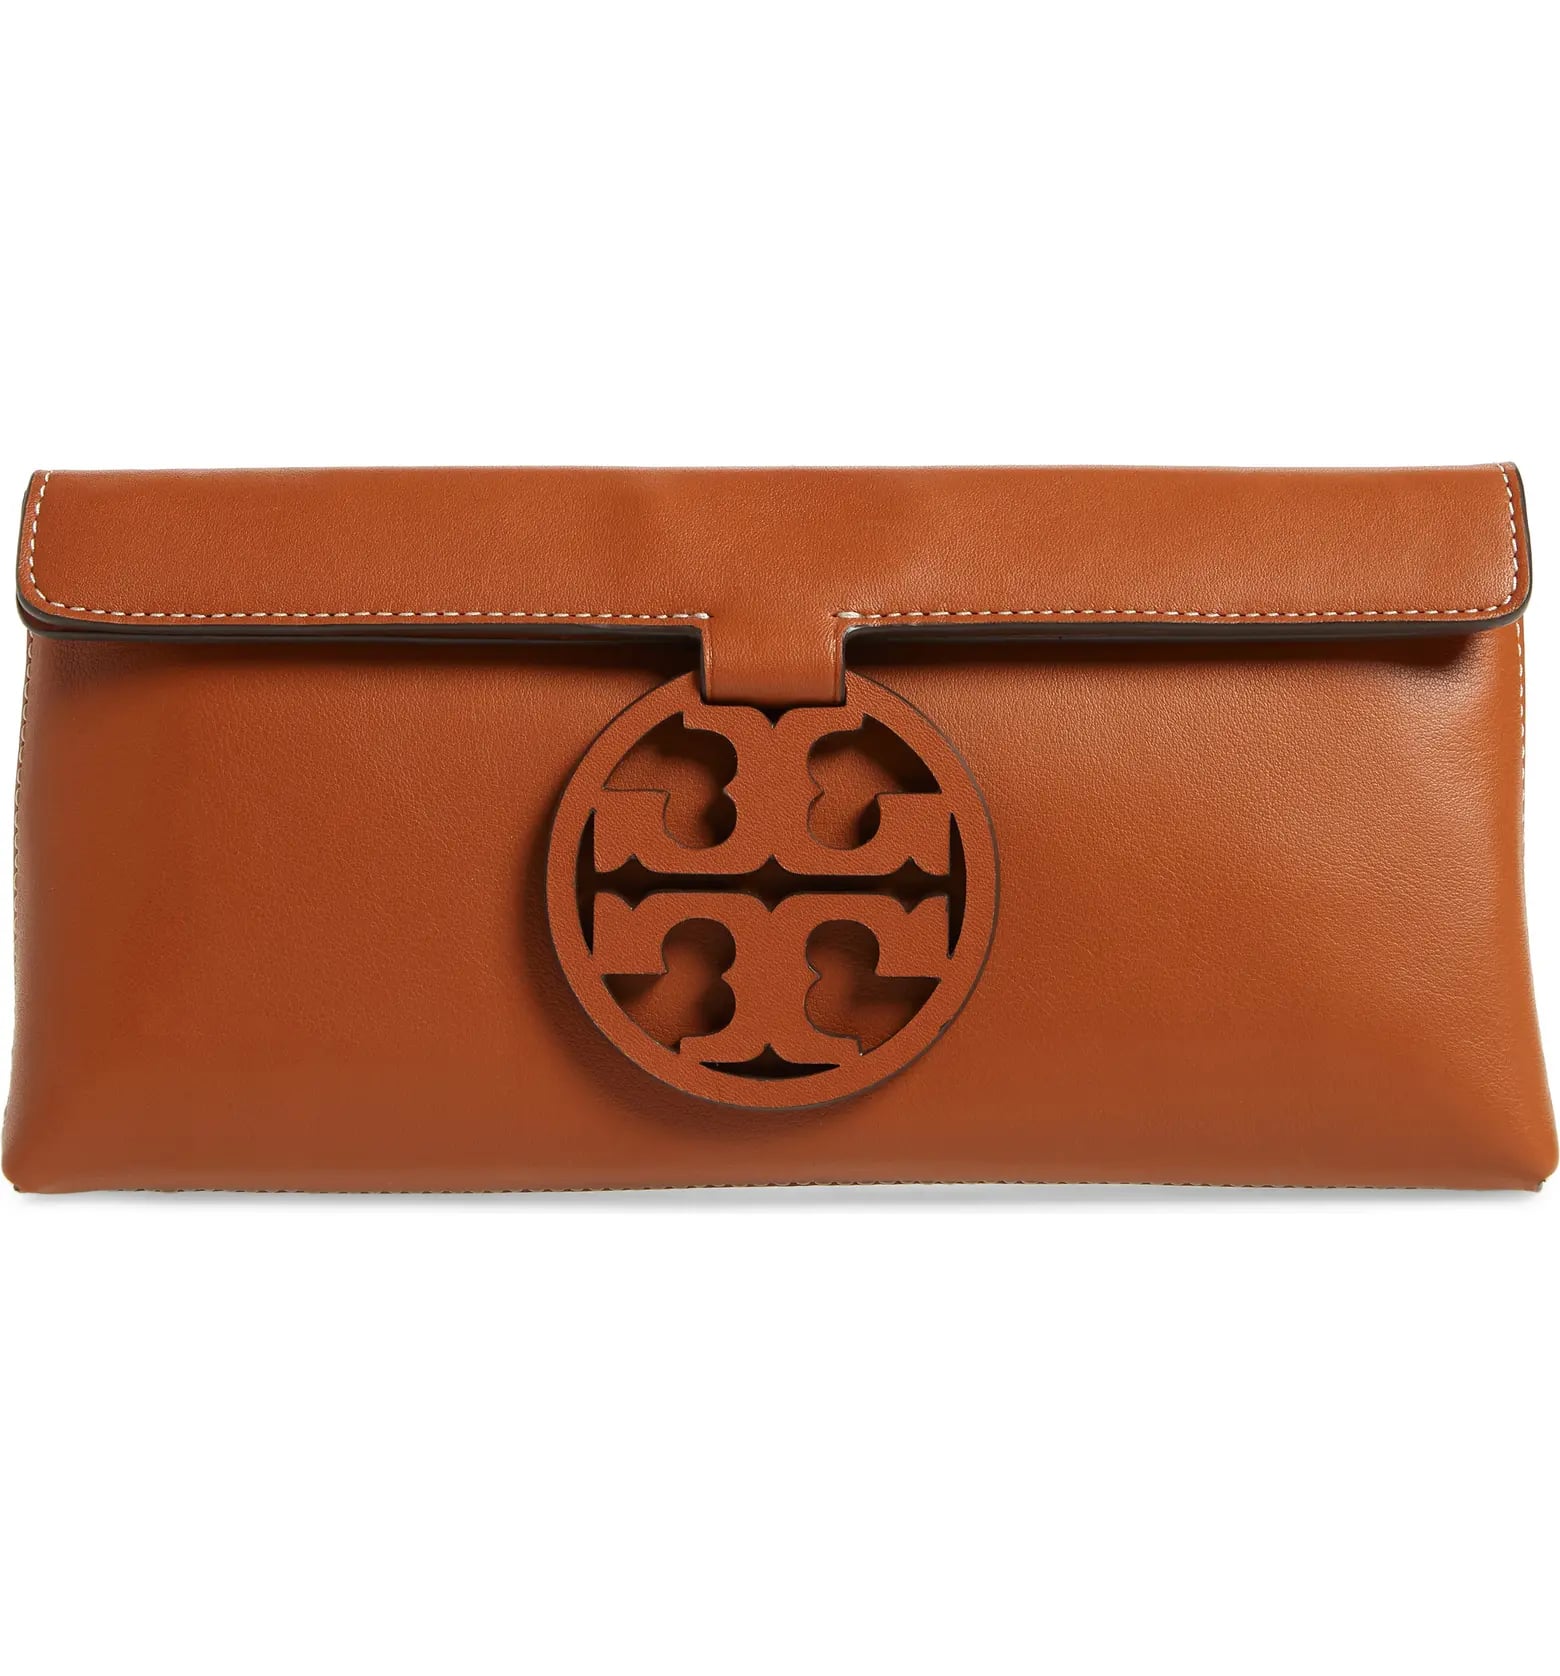 Tory Burch Miller Leather Clutch | Nordstrom Is Having a Big Secret Sale  Right Now, and We Want These 35 Steals | POPSUGAR Fashion Photo 13